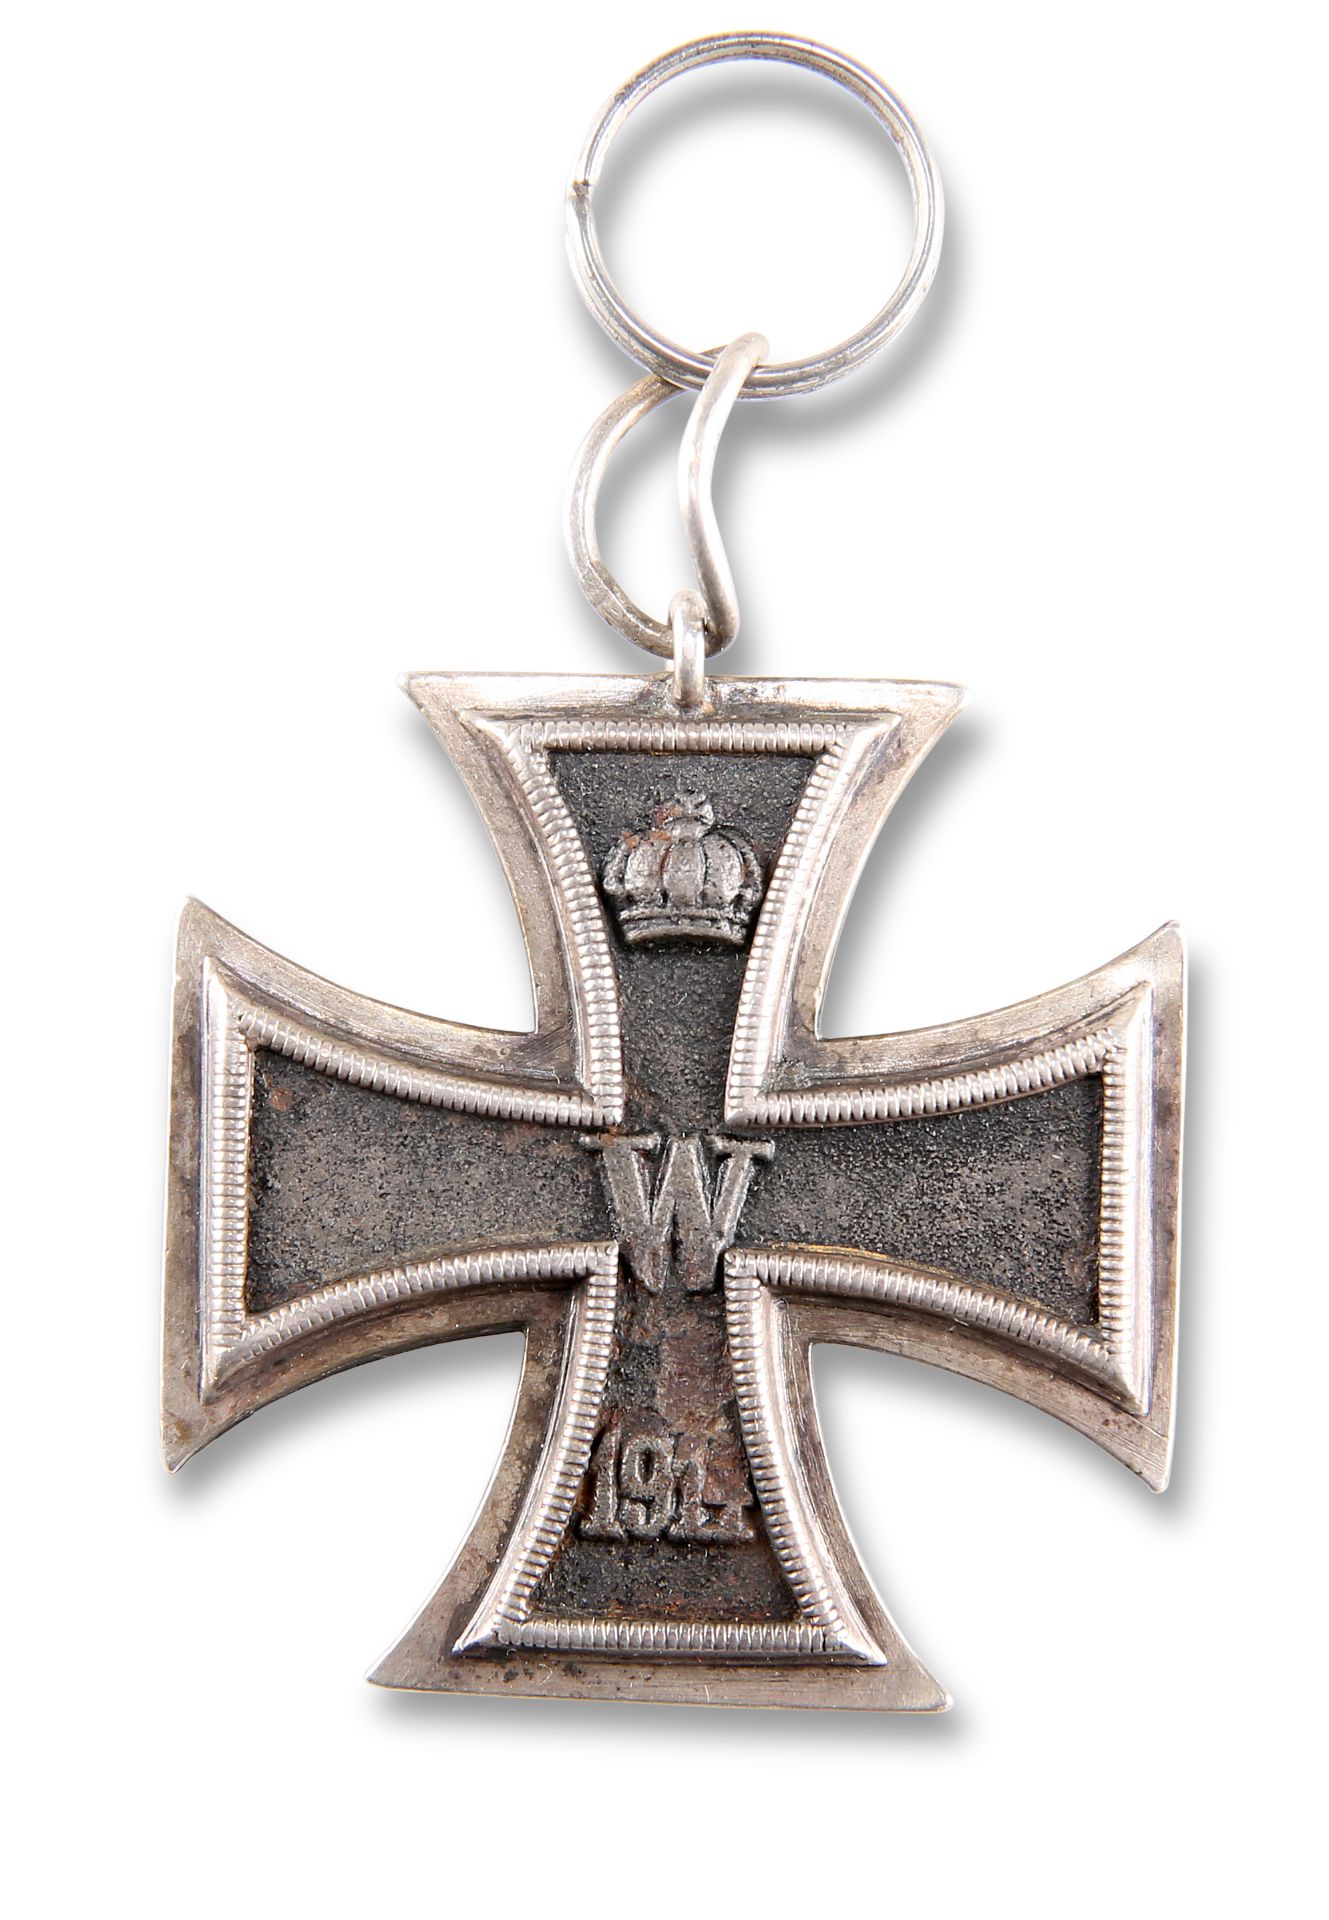 AN IMPERIAL GERMAN 1914 IRON CROSS 2ND CLASS - Image 2 of 2